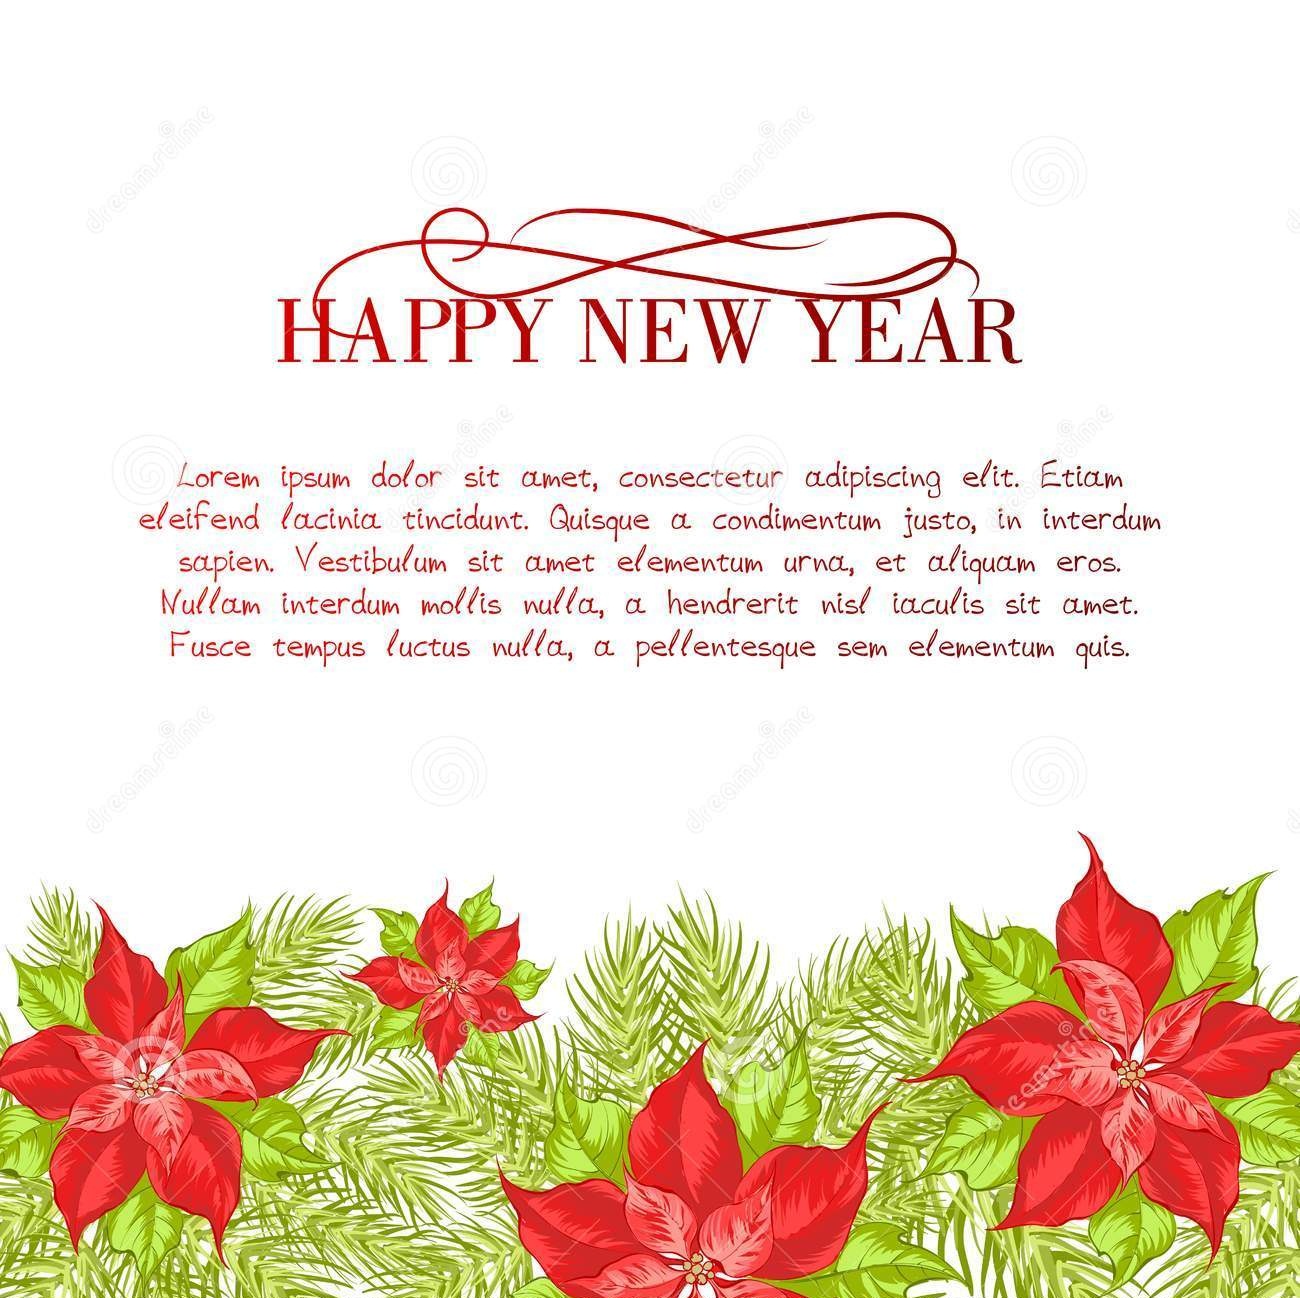 Happy New Year Greetings - New Year Cards